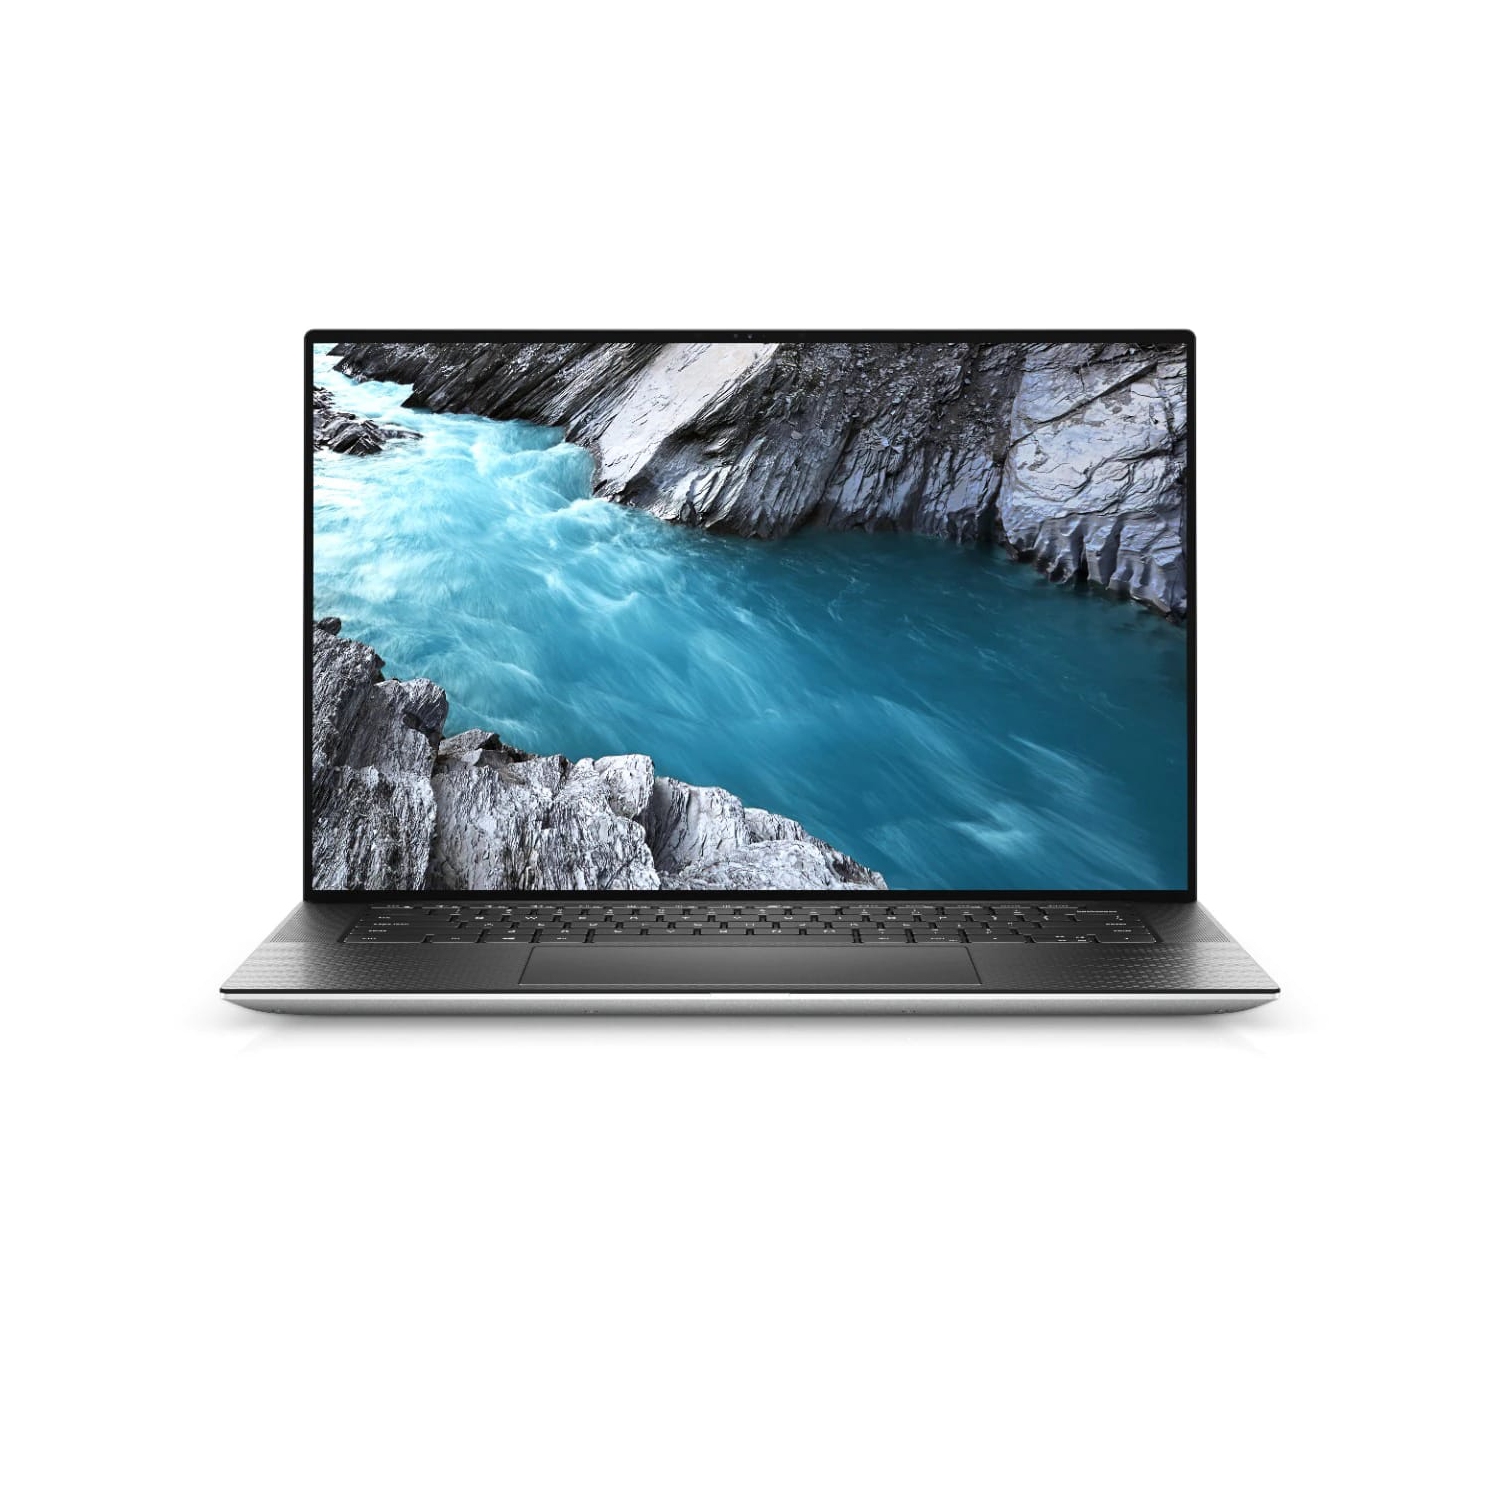 Refurbished (Excellent) - Dell XPS 15 9500 Laptop (2020), 15" 4K Touch, Core i7 - 256GB SSD - 32GB RAM - 1650 Ti, 8 Cores @ 5.1 GHz - 10th Gen CPU Certified Refurbished